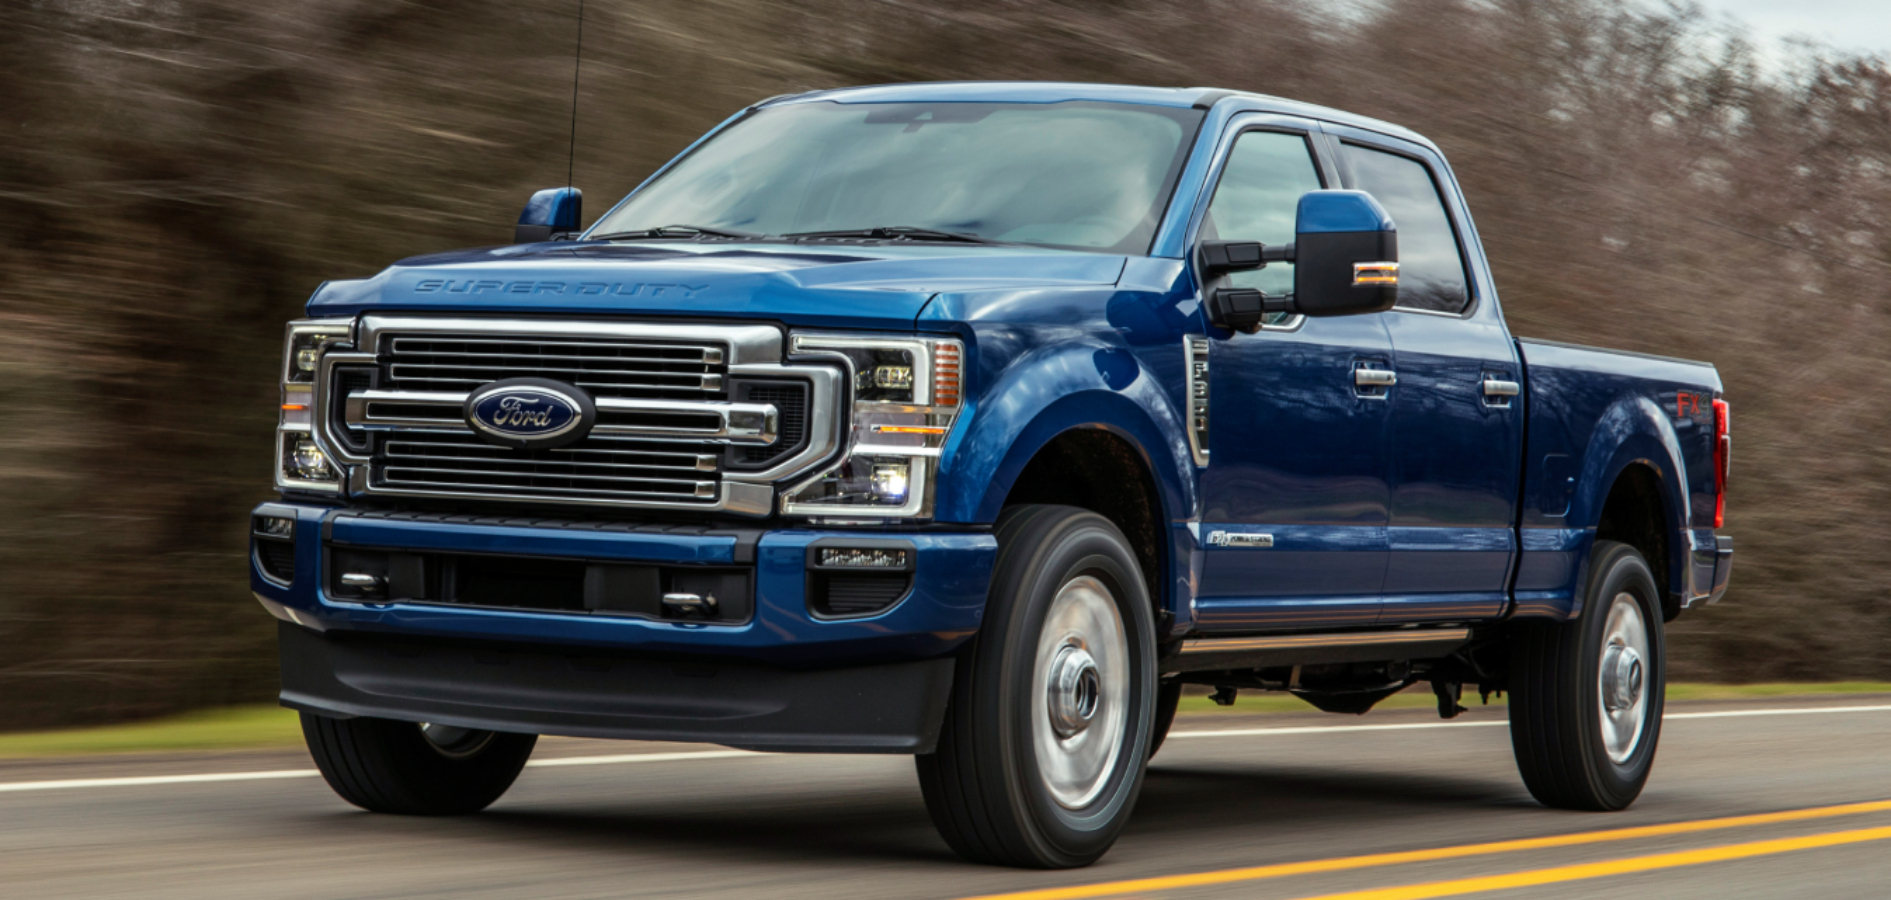 The 2022 Ford F-350 is a satisfying new pickup truck